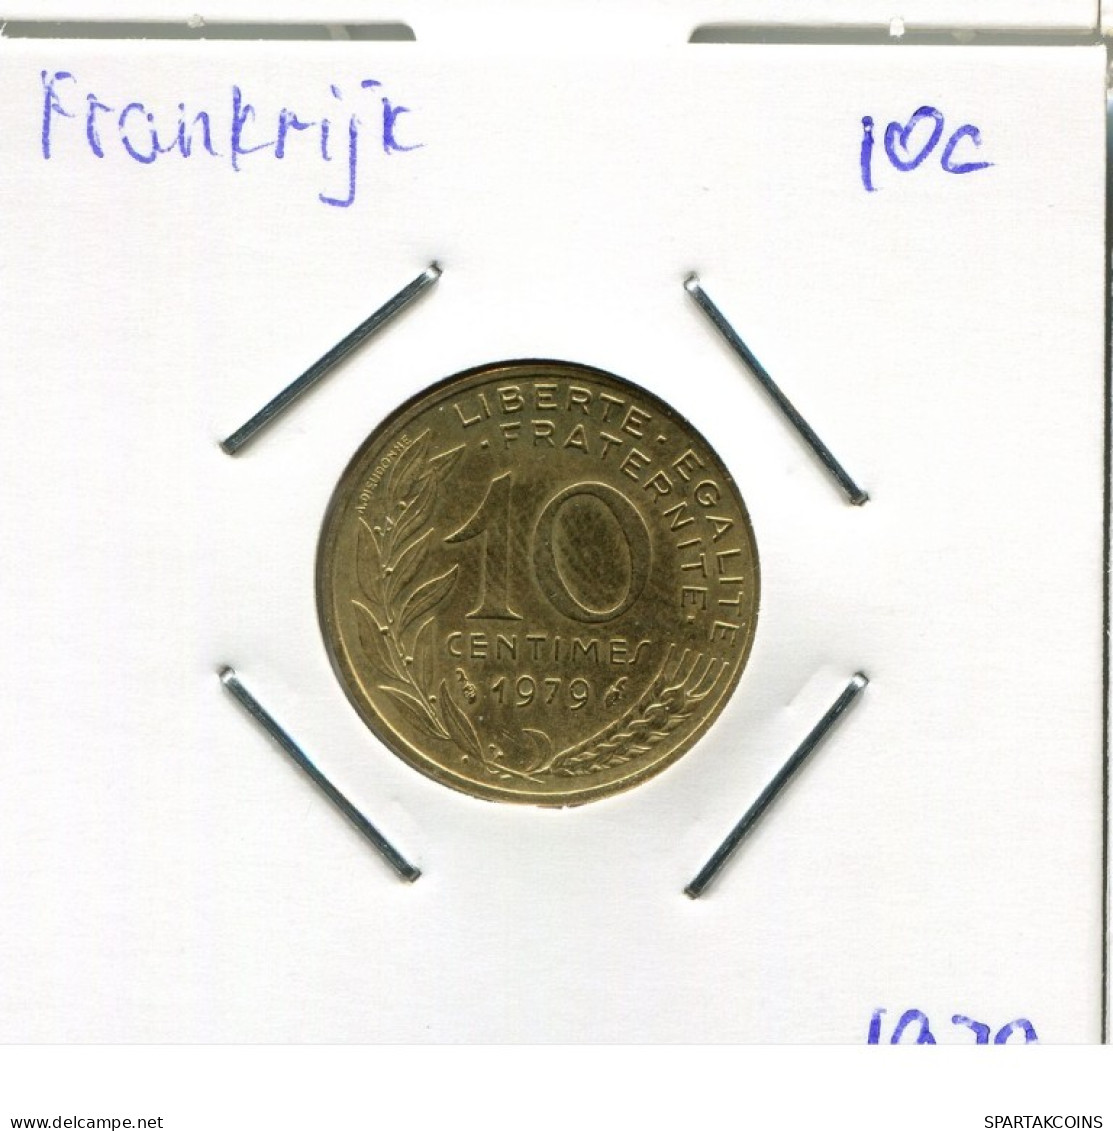 10 CENTIMES 1979 FRANCE Coin French Coin #AM820.U.A - 10 Centimes